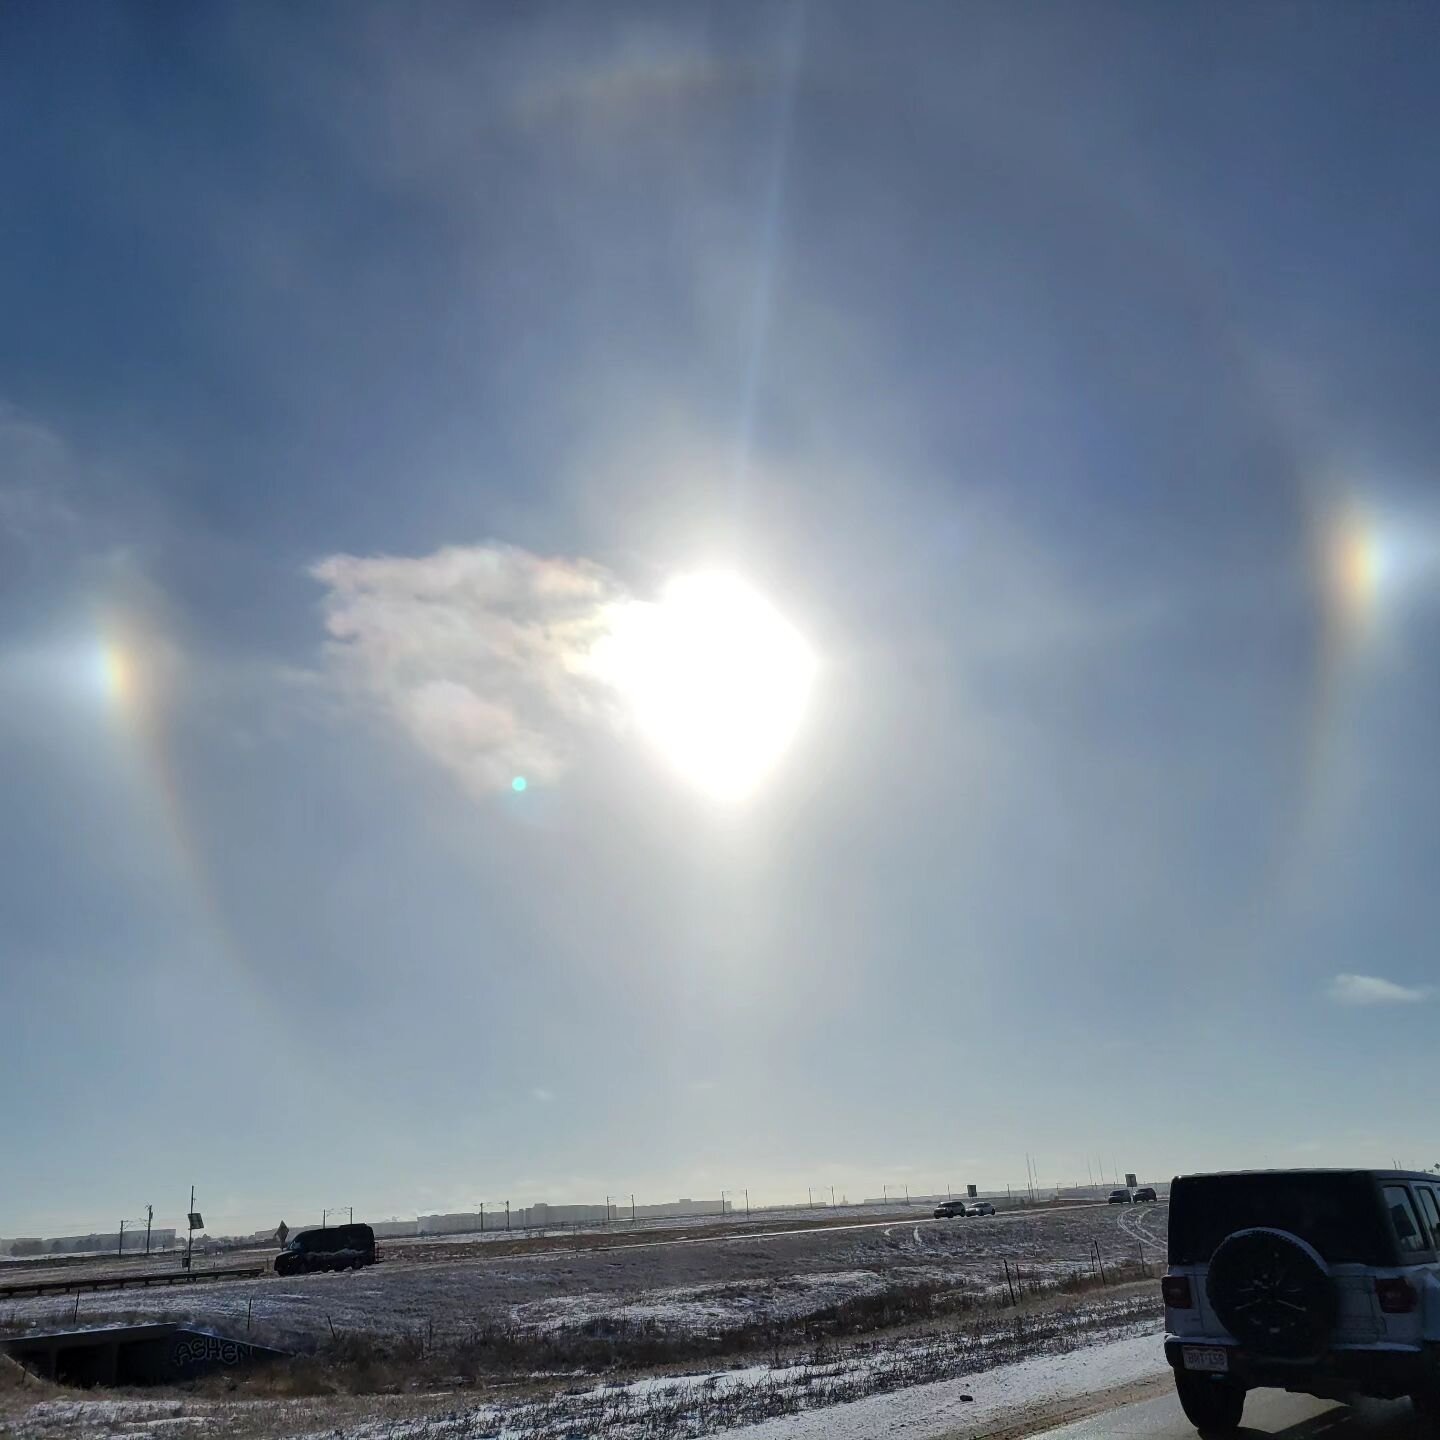 Anyone ever hear of a sun dog or see one? I didn't get a very good vibrant picture when I first noticed it but got this nice blurry one showing the full circle! 

A sundog happens when I freeing cold outside and water vapor is froze in the atmosphere